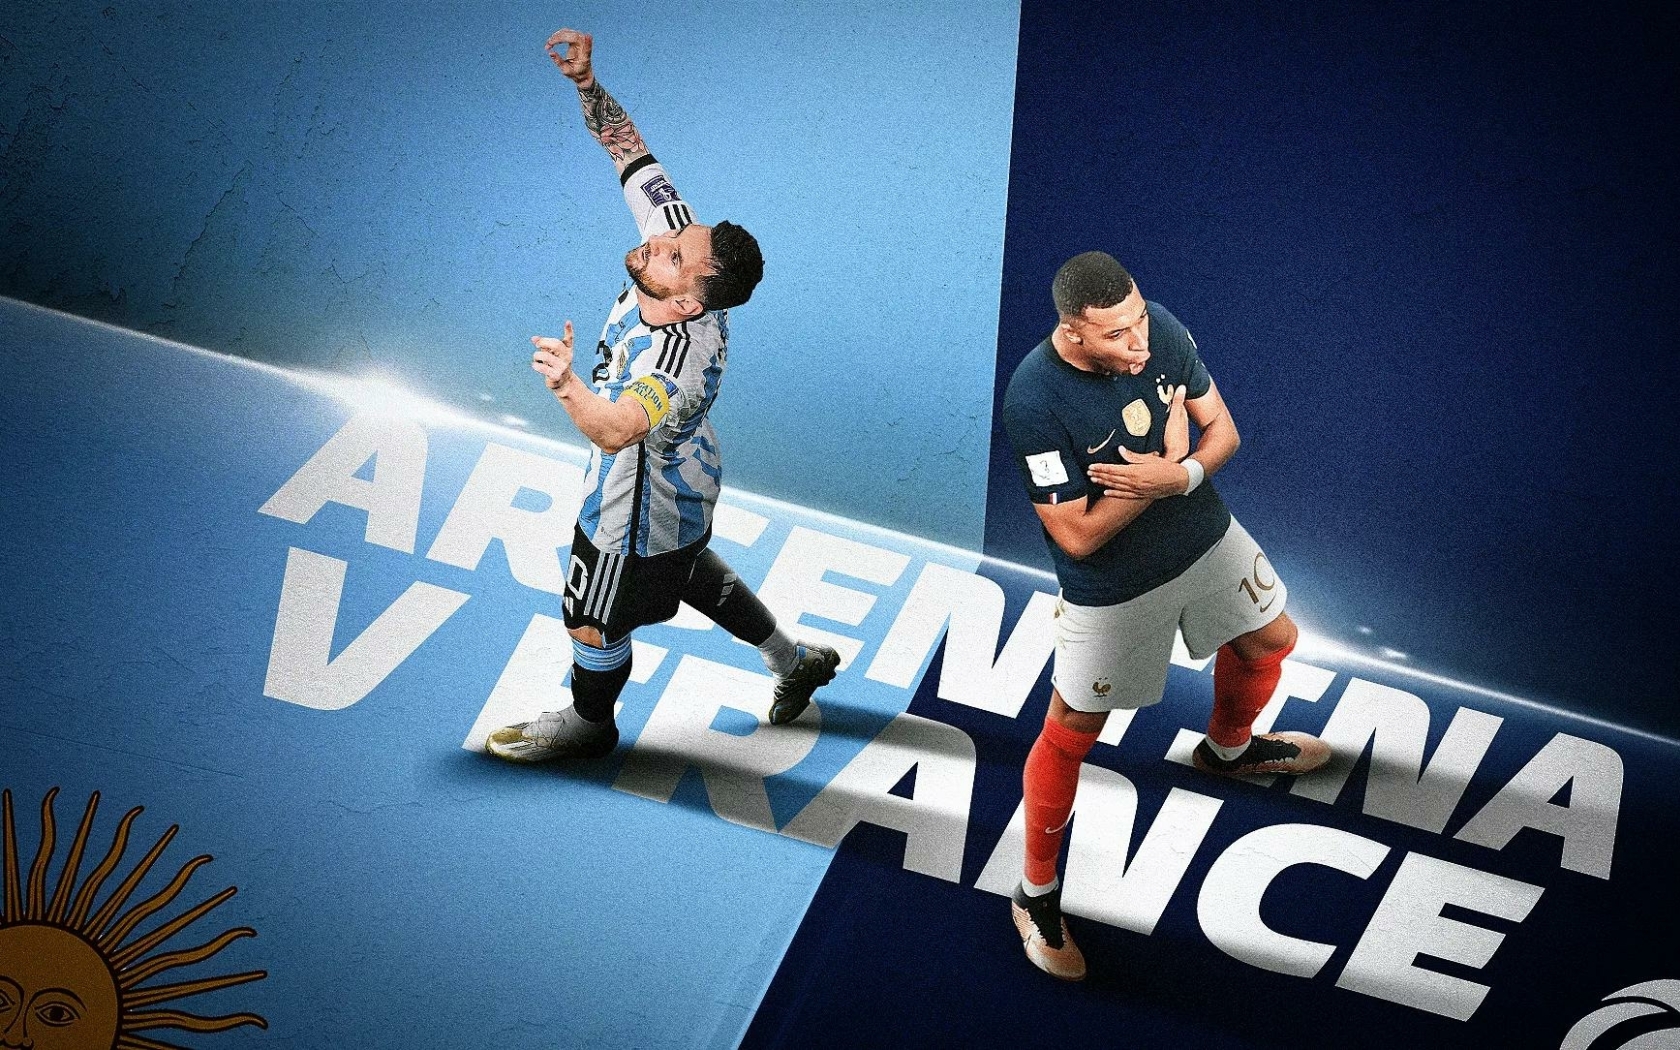 1680x1050 Mbappe V Messi Fifa 2022 World Cup 1680x1050 Resolution